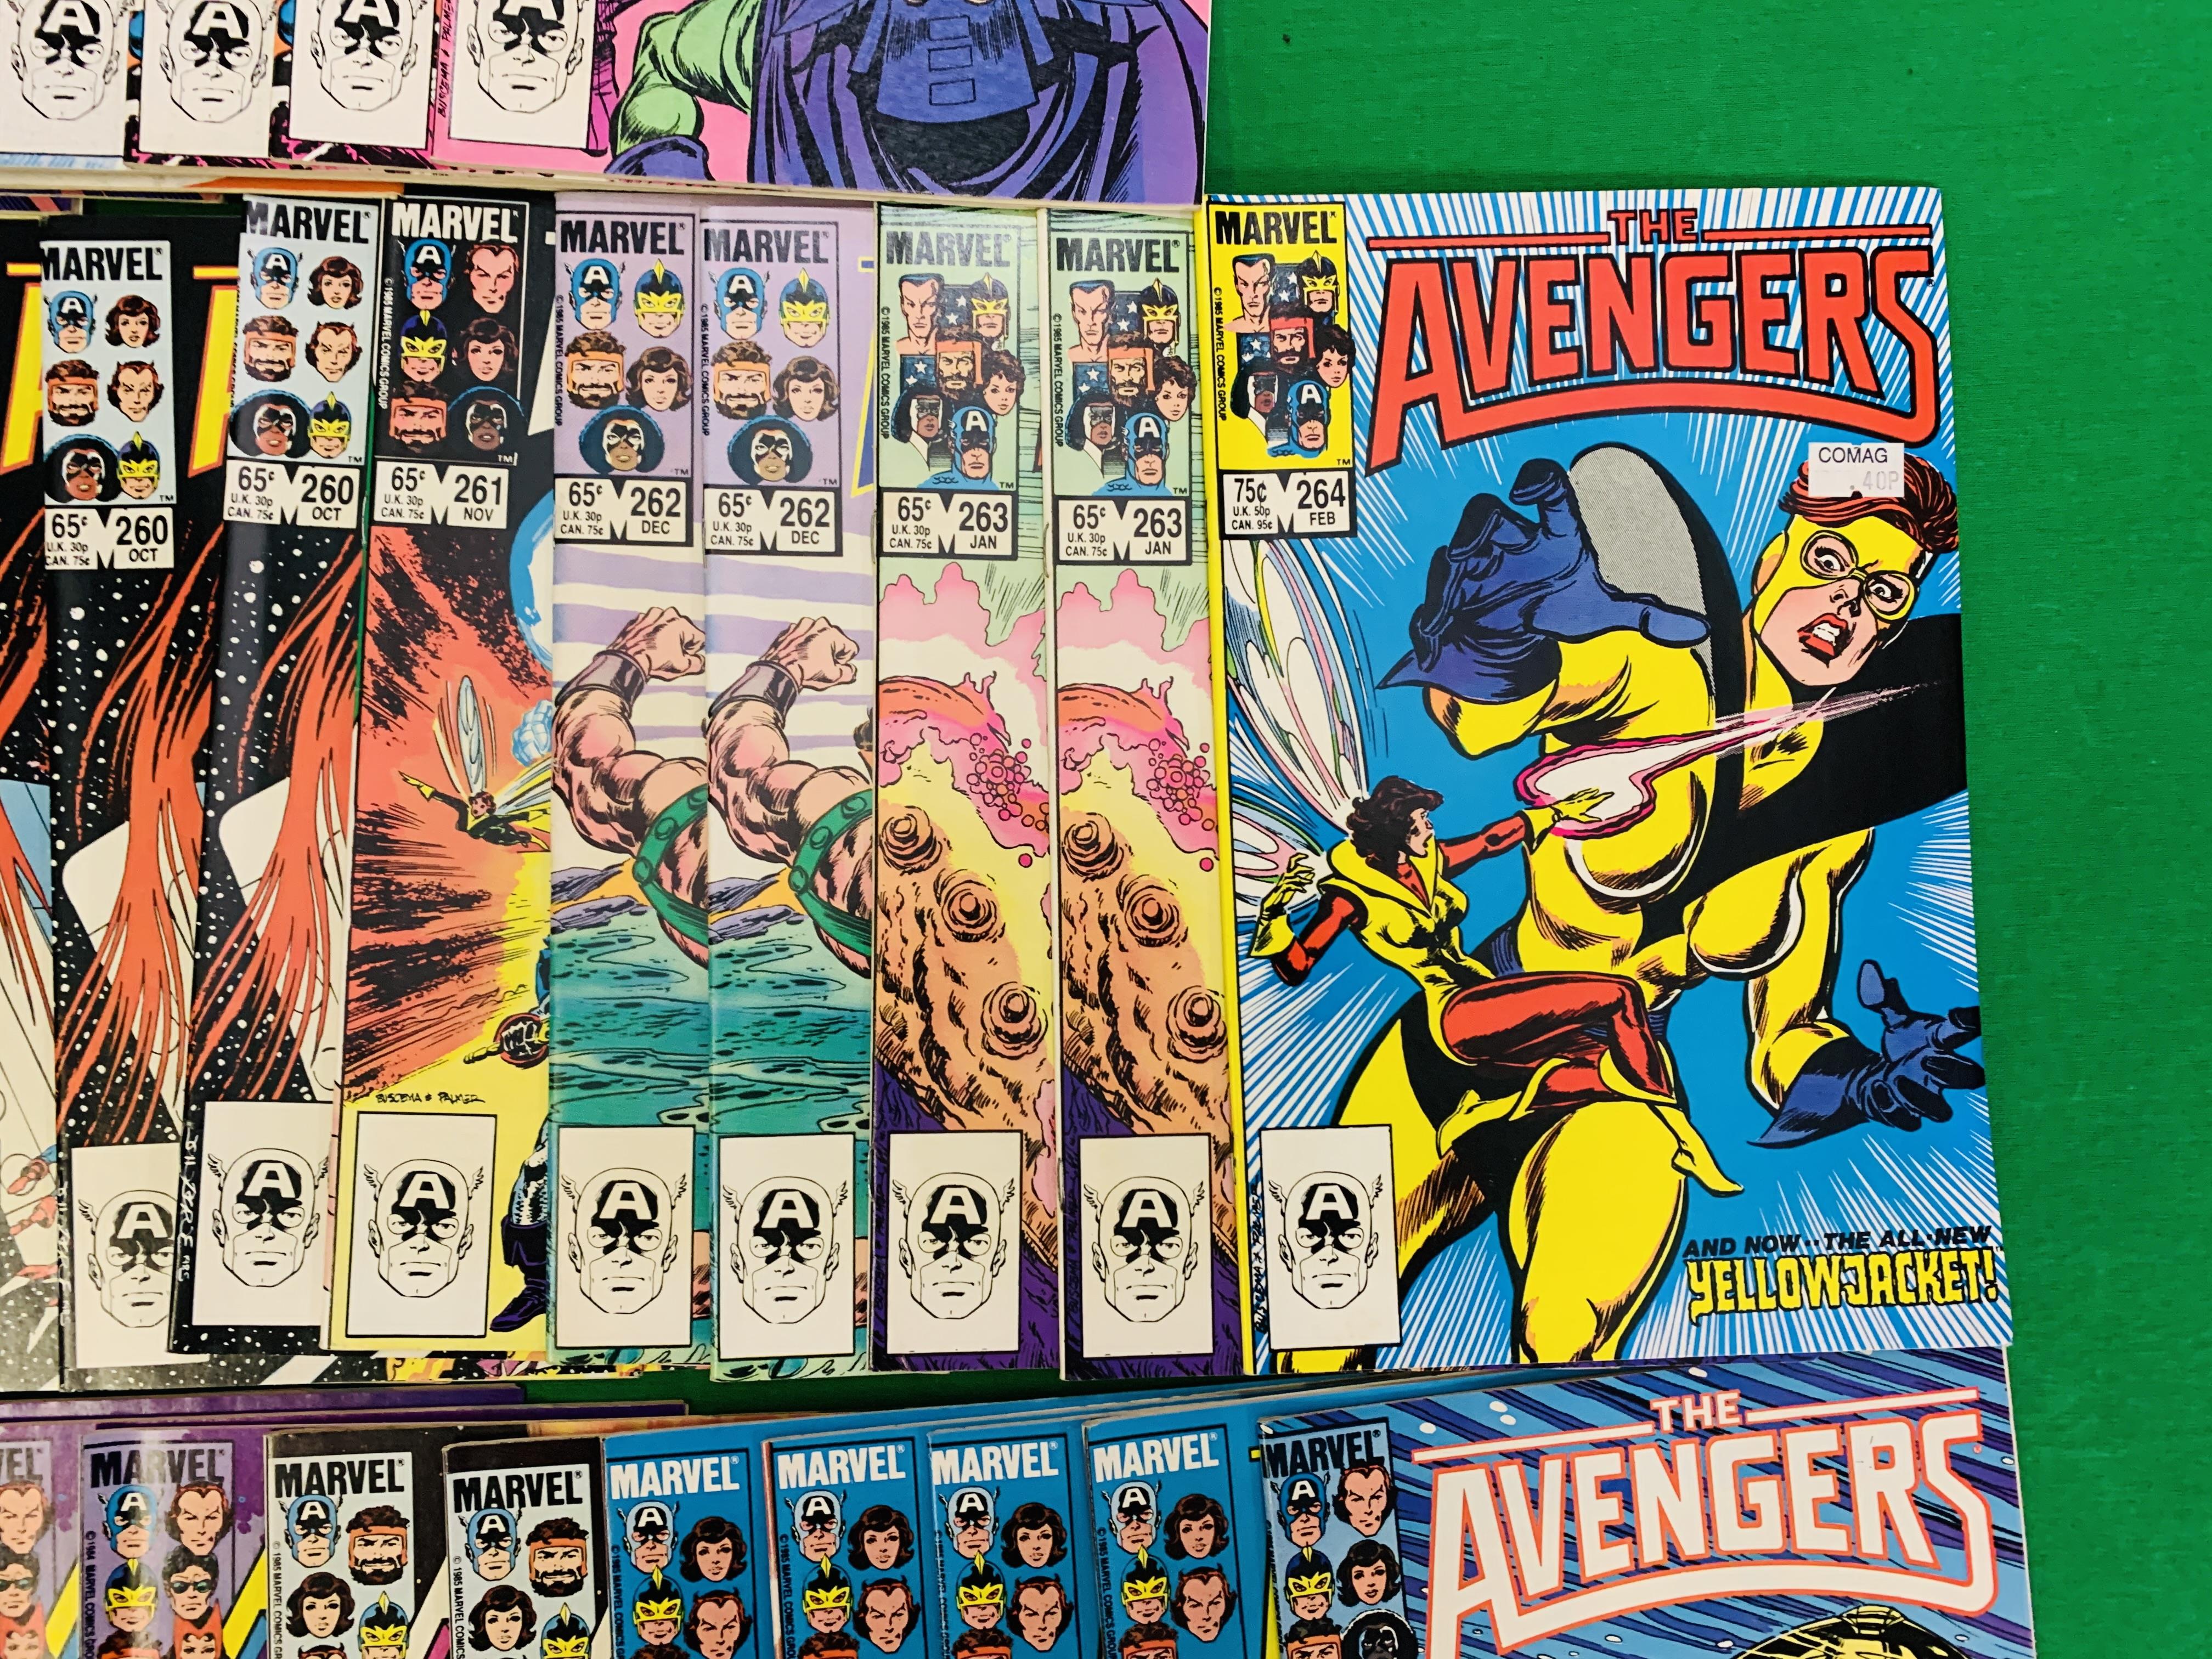 MARVEL COMICS THE AVENGERS NO. 101 - 299, MISSING ISSUES 103 AND 110. - Image 114 of 130